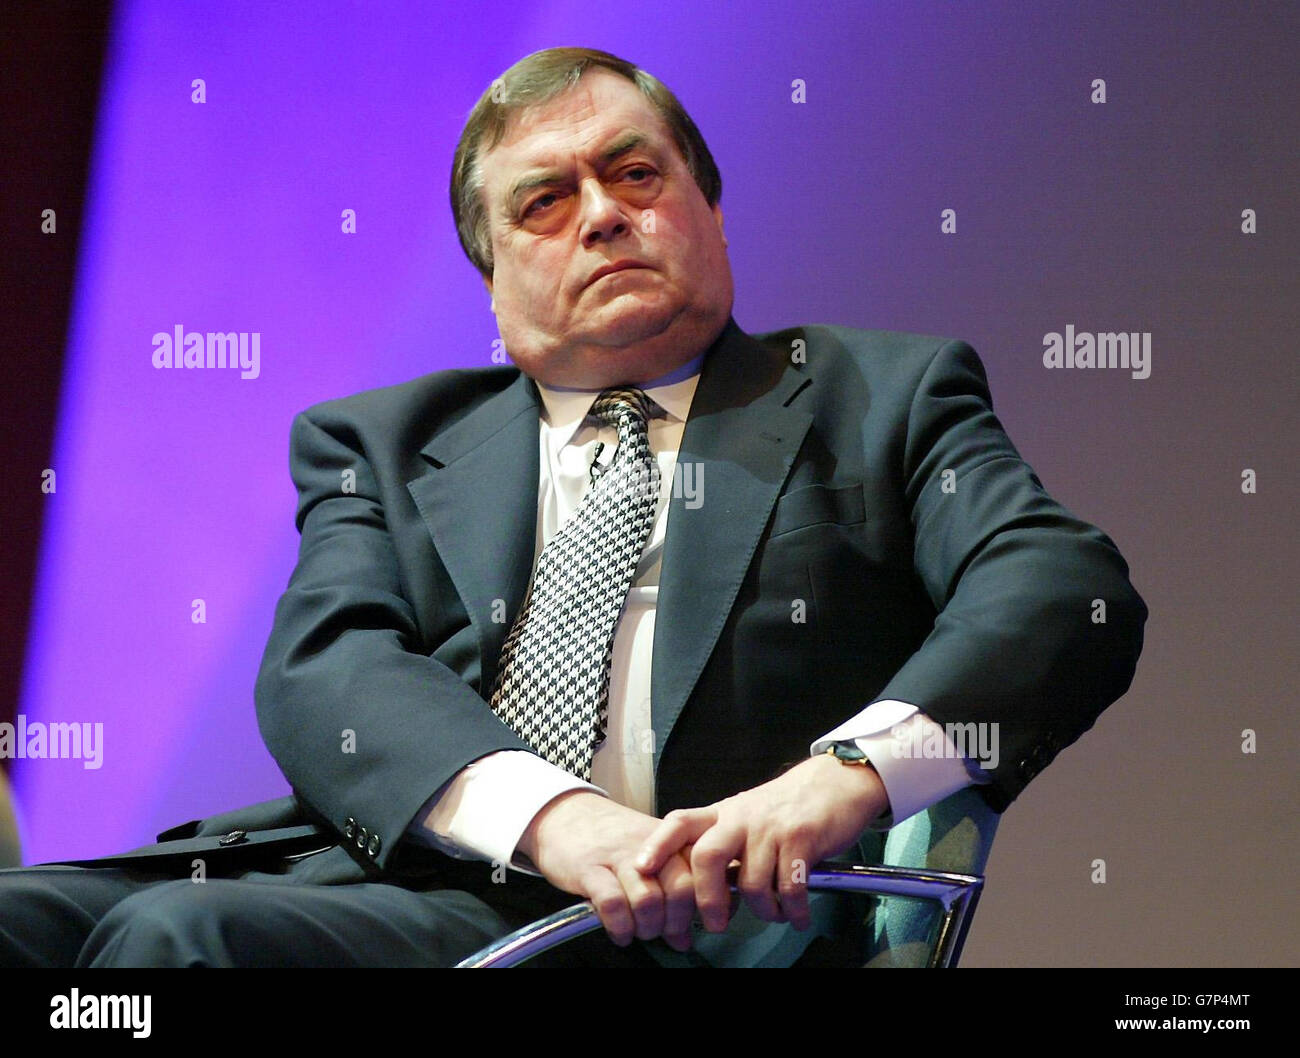 Deputy Prime Minister John Prescott speaking at the Sustainable Communities Summit in which he pledged to put sustainability at the heart of planning policy as part of his plan to regenerate local communities. Stock Photo